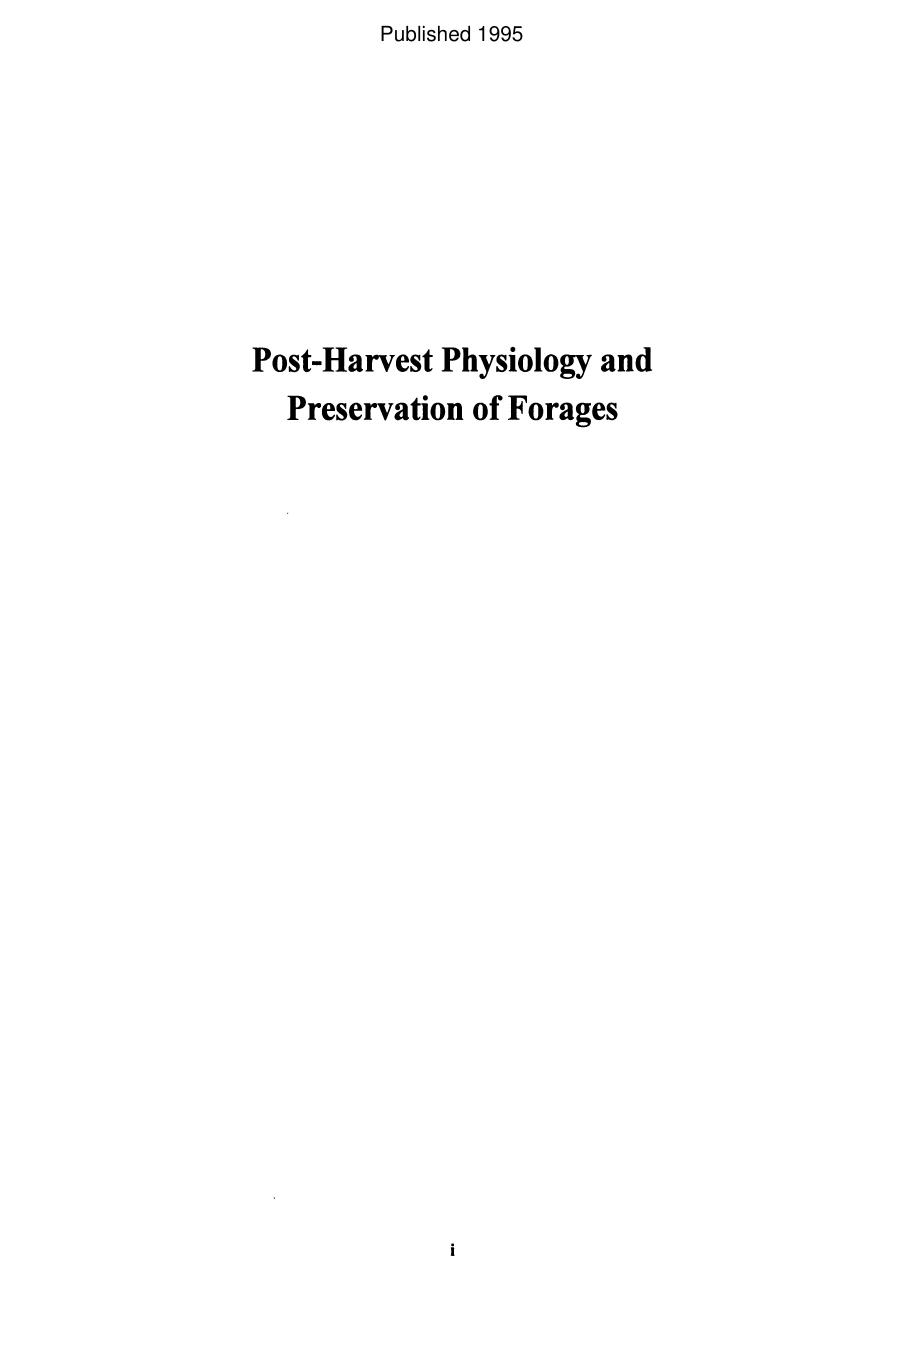 Post-Harvest Physiology and Preservation of Forages ( PDFDrive ). 1995